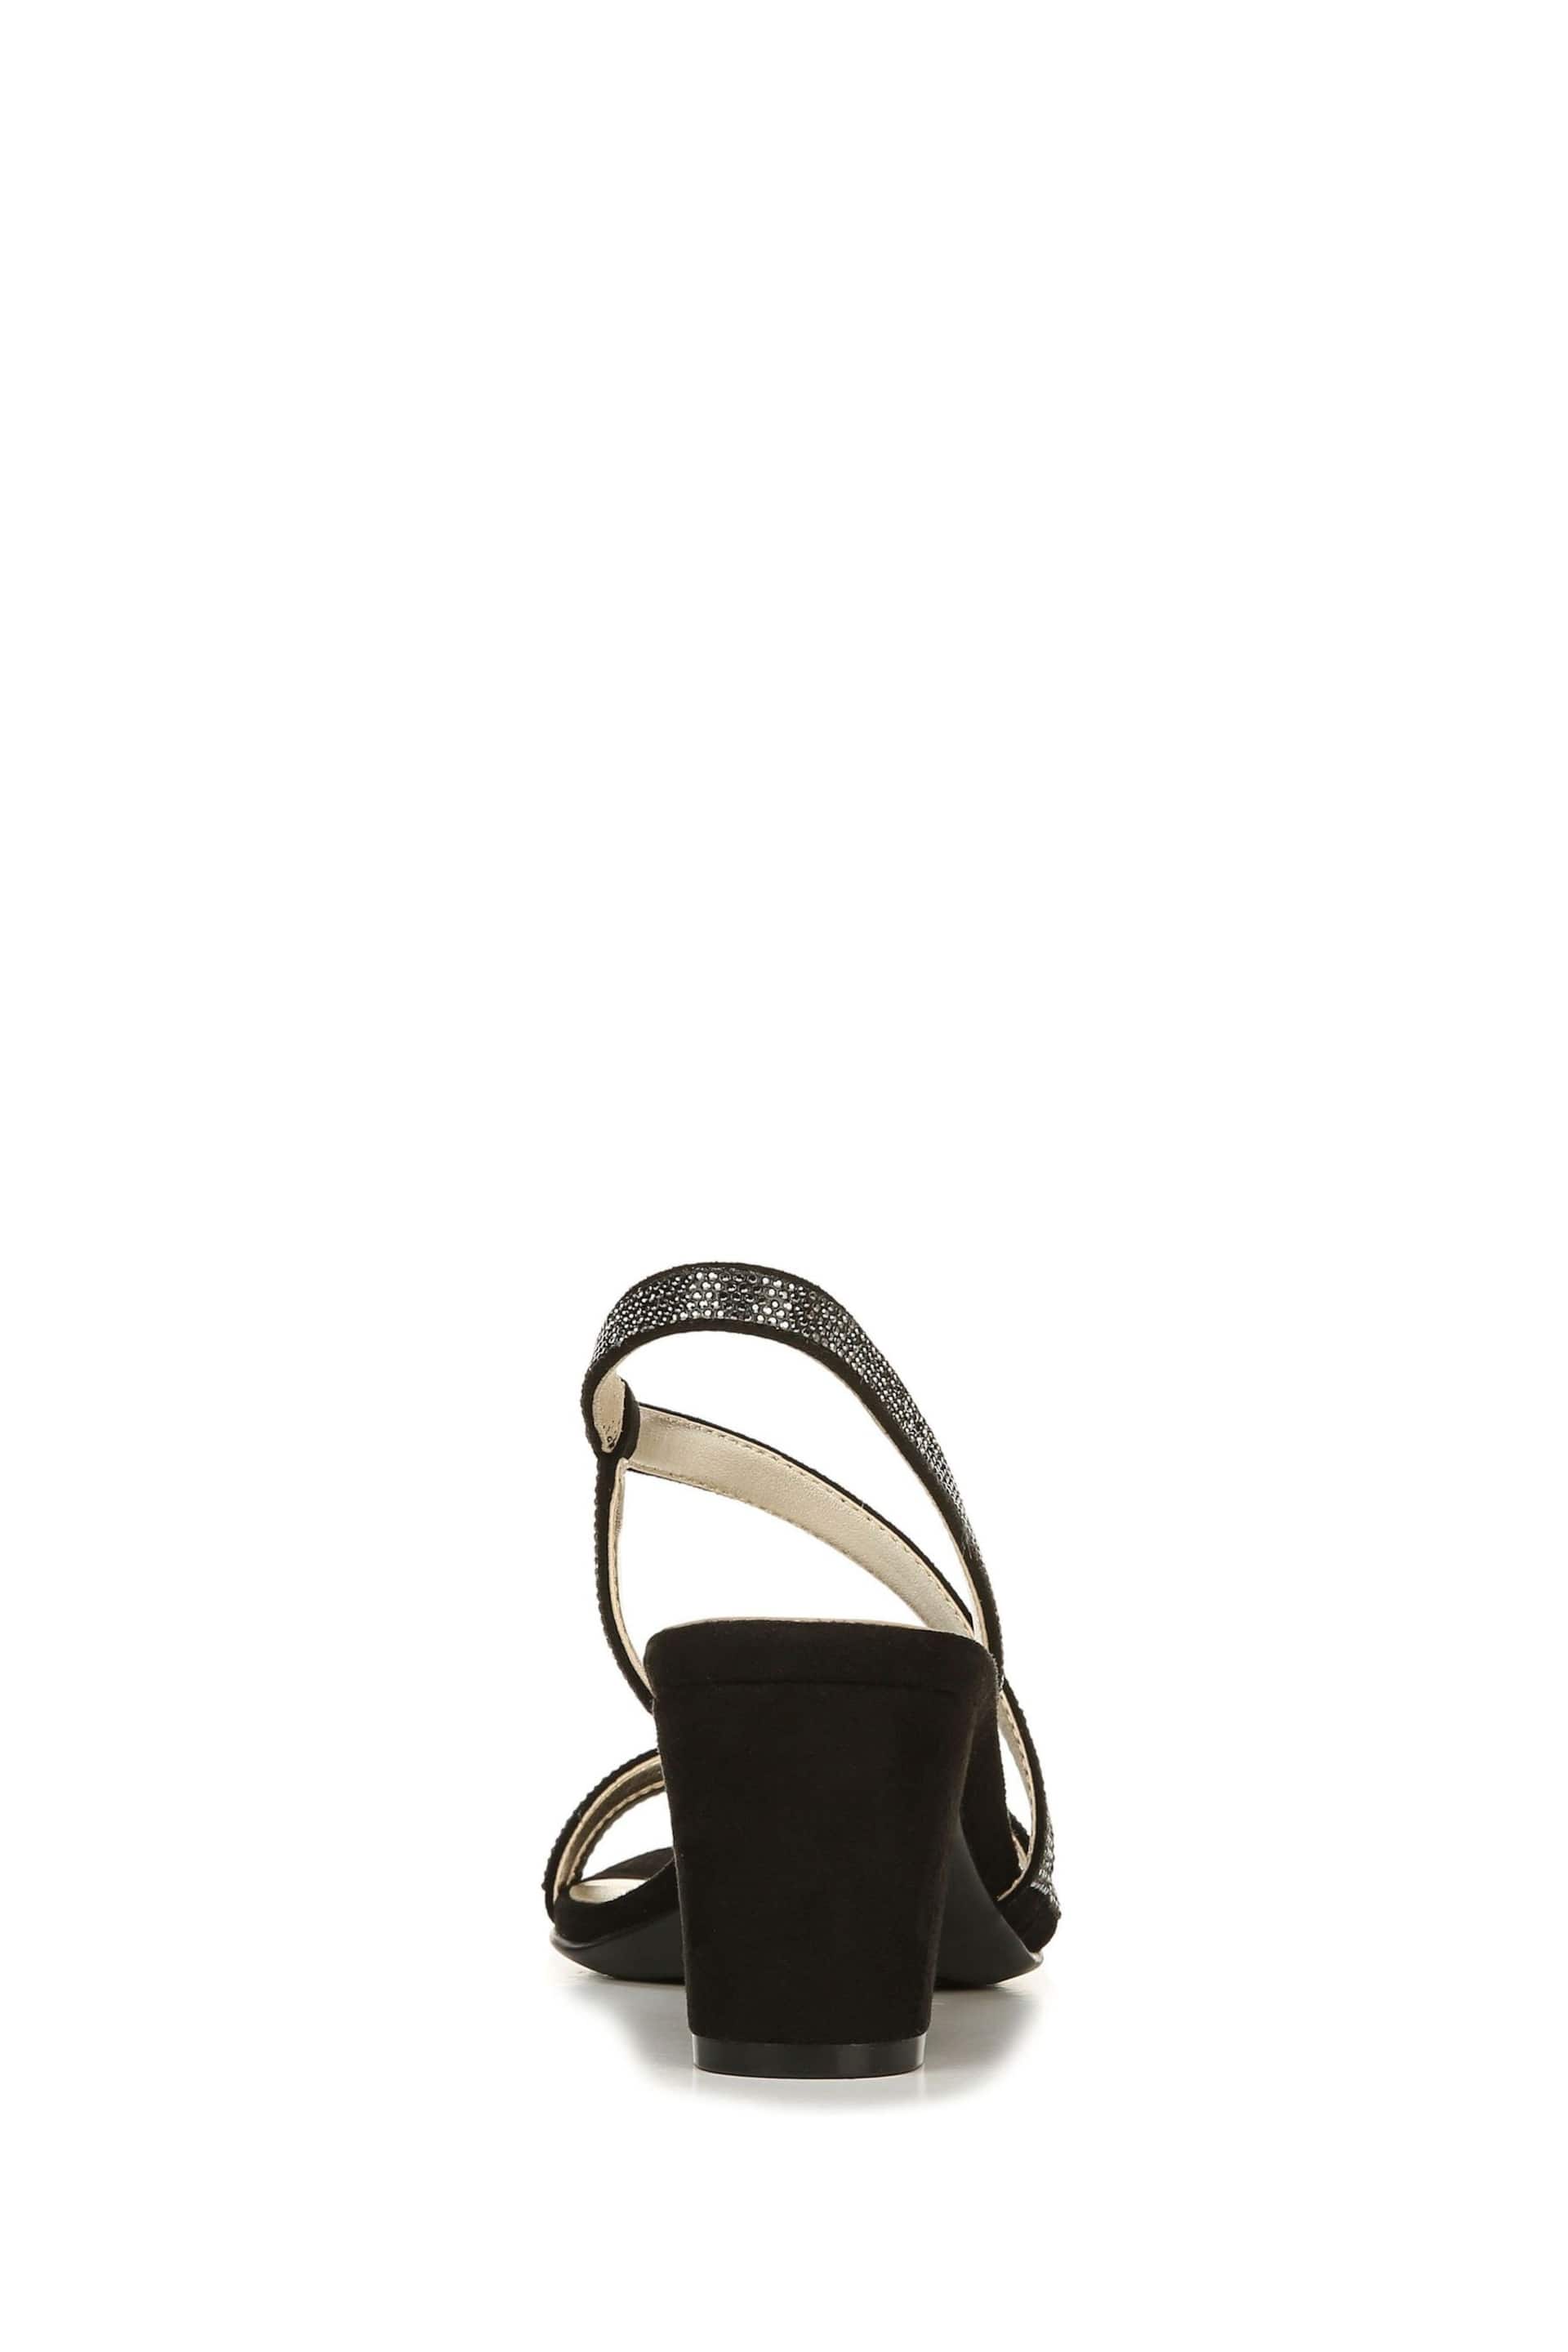 Naturalizer Vanessa Strappy Sandals - Image 5 of 7